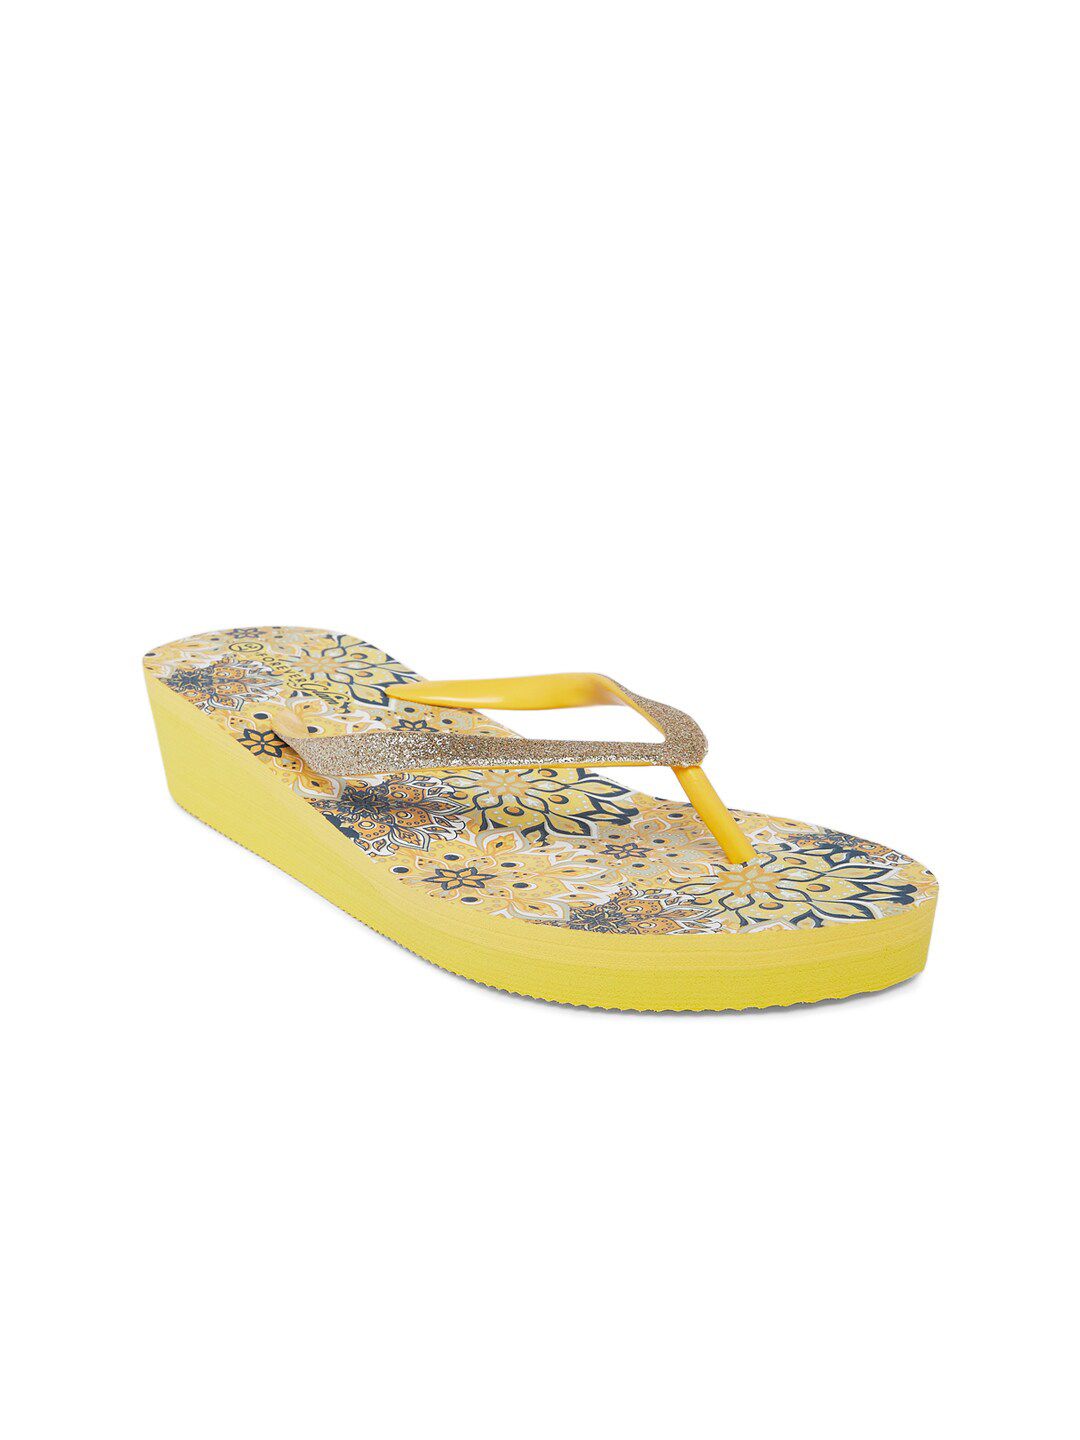 Forever Glam by Pantaloons Women Yellow & Blue Printed Thong Flip-Flops Price in India